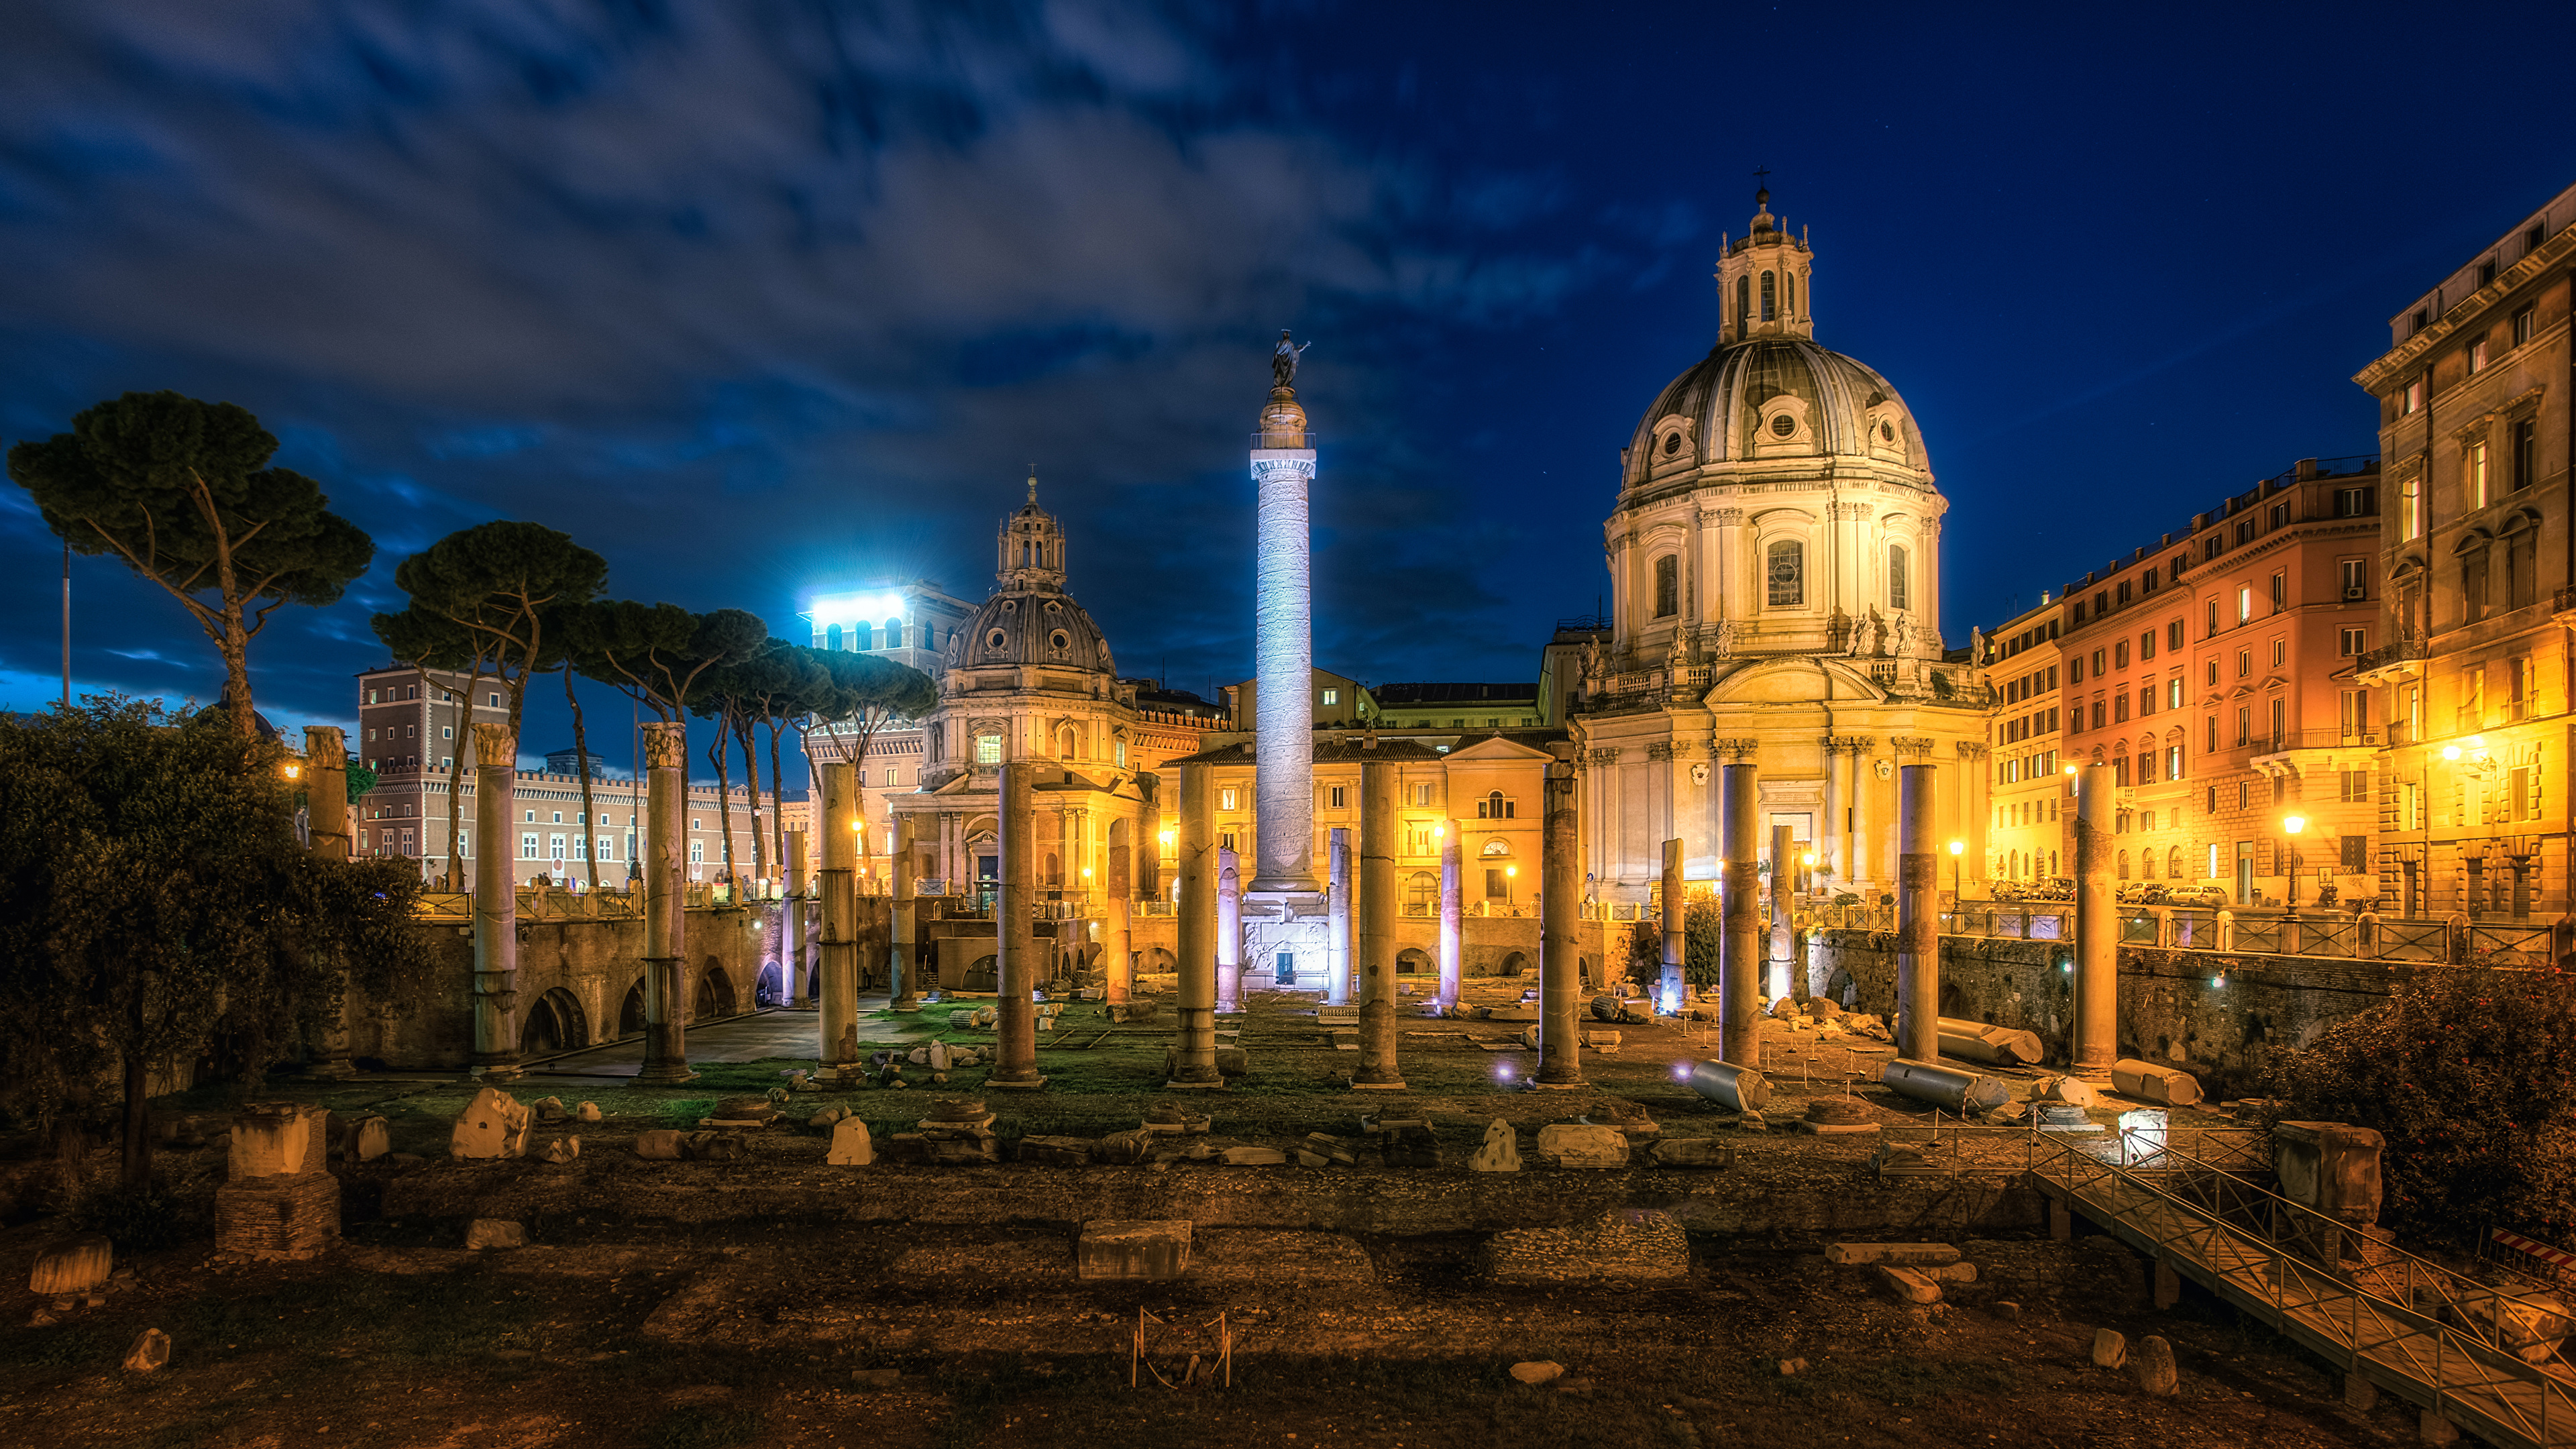 Image Rome Italy Trajans Forum Ruins Night Cities Famous 3840x2160